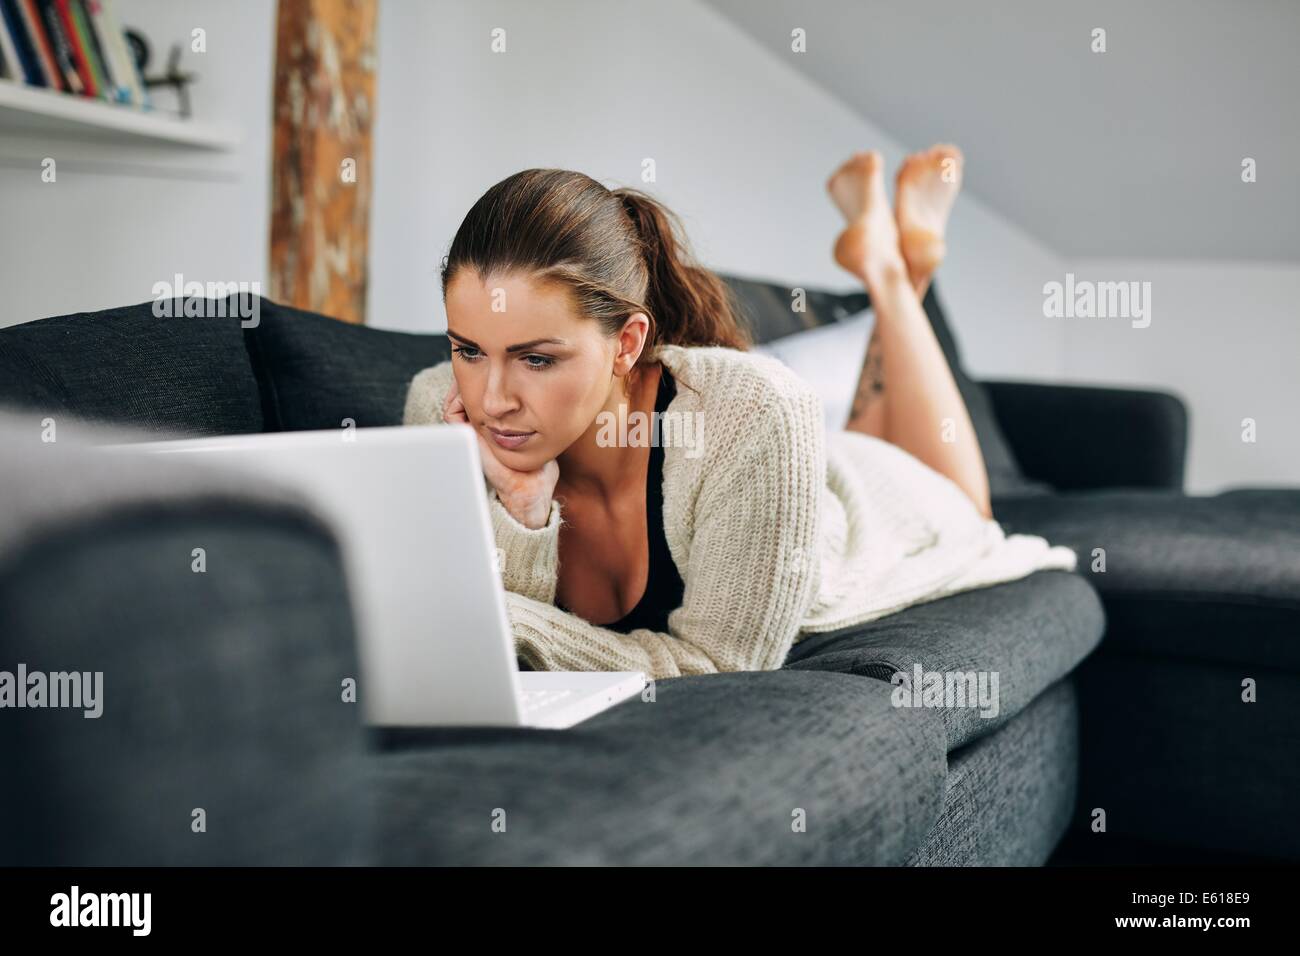 Portrait of beautiful young woman working on laptop while lying on sofa. Female using laptop at home. Stock Photo